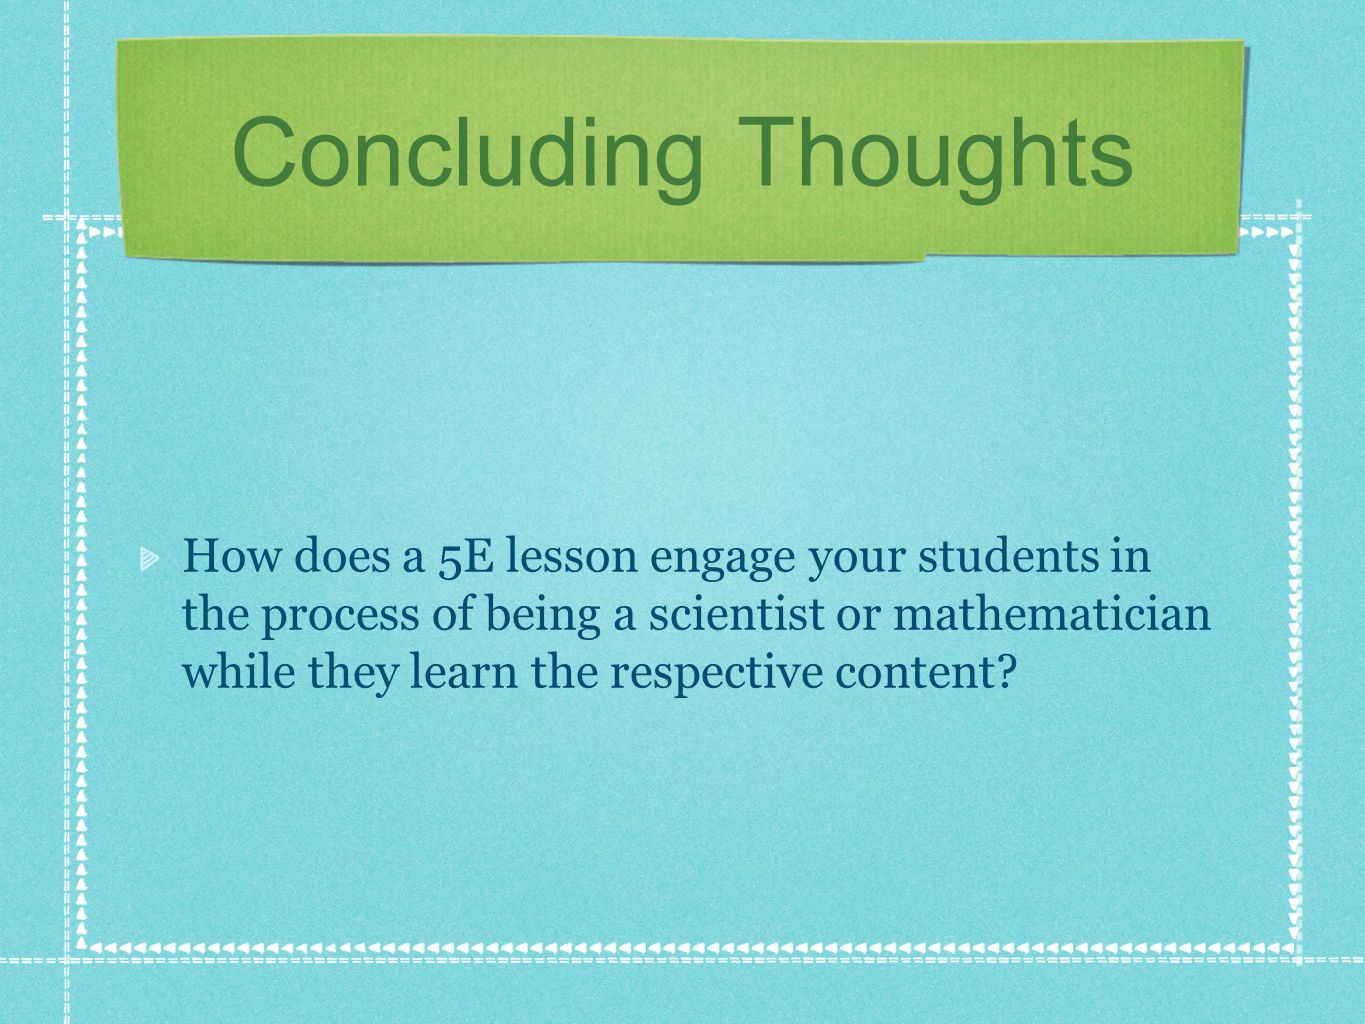 Concluding Thoughts How does a 5E lesson engage your students in the process of being a scientist or mathematician while they learn the respective content